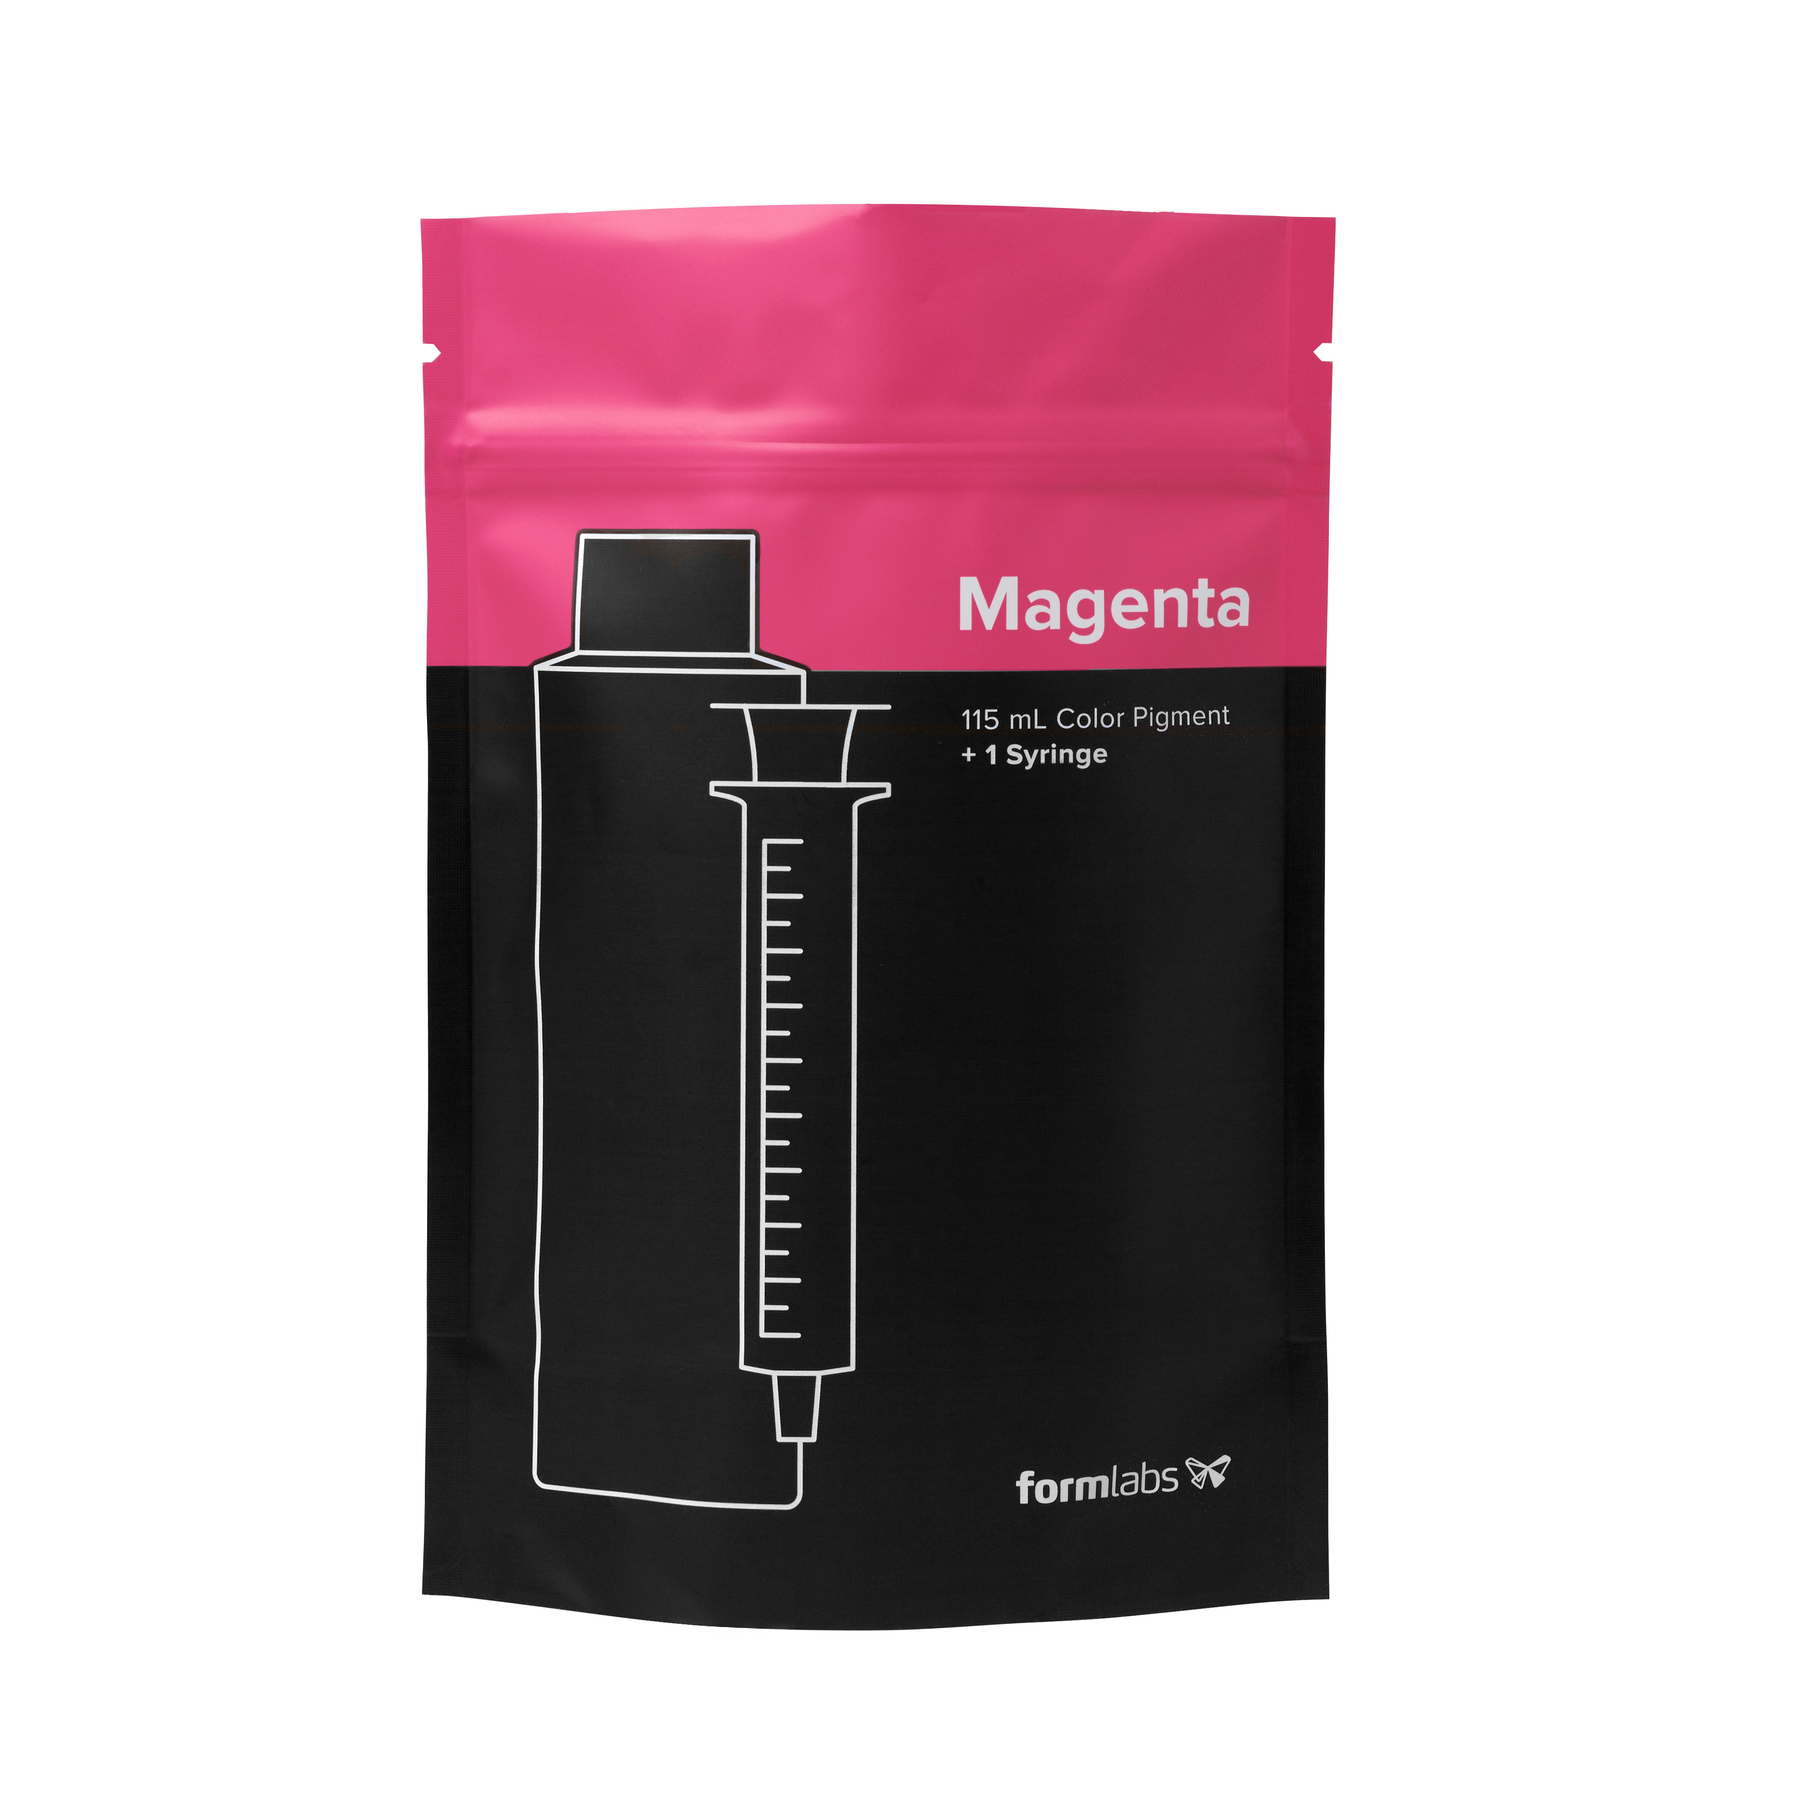 Magenta syringe. Shop additive manufacturing printers, resins and accessories | eacadditive.com.